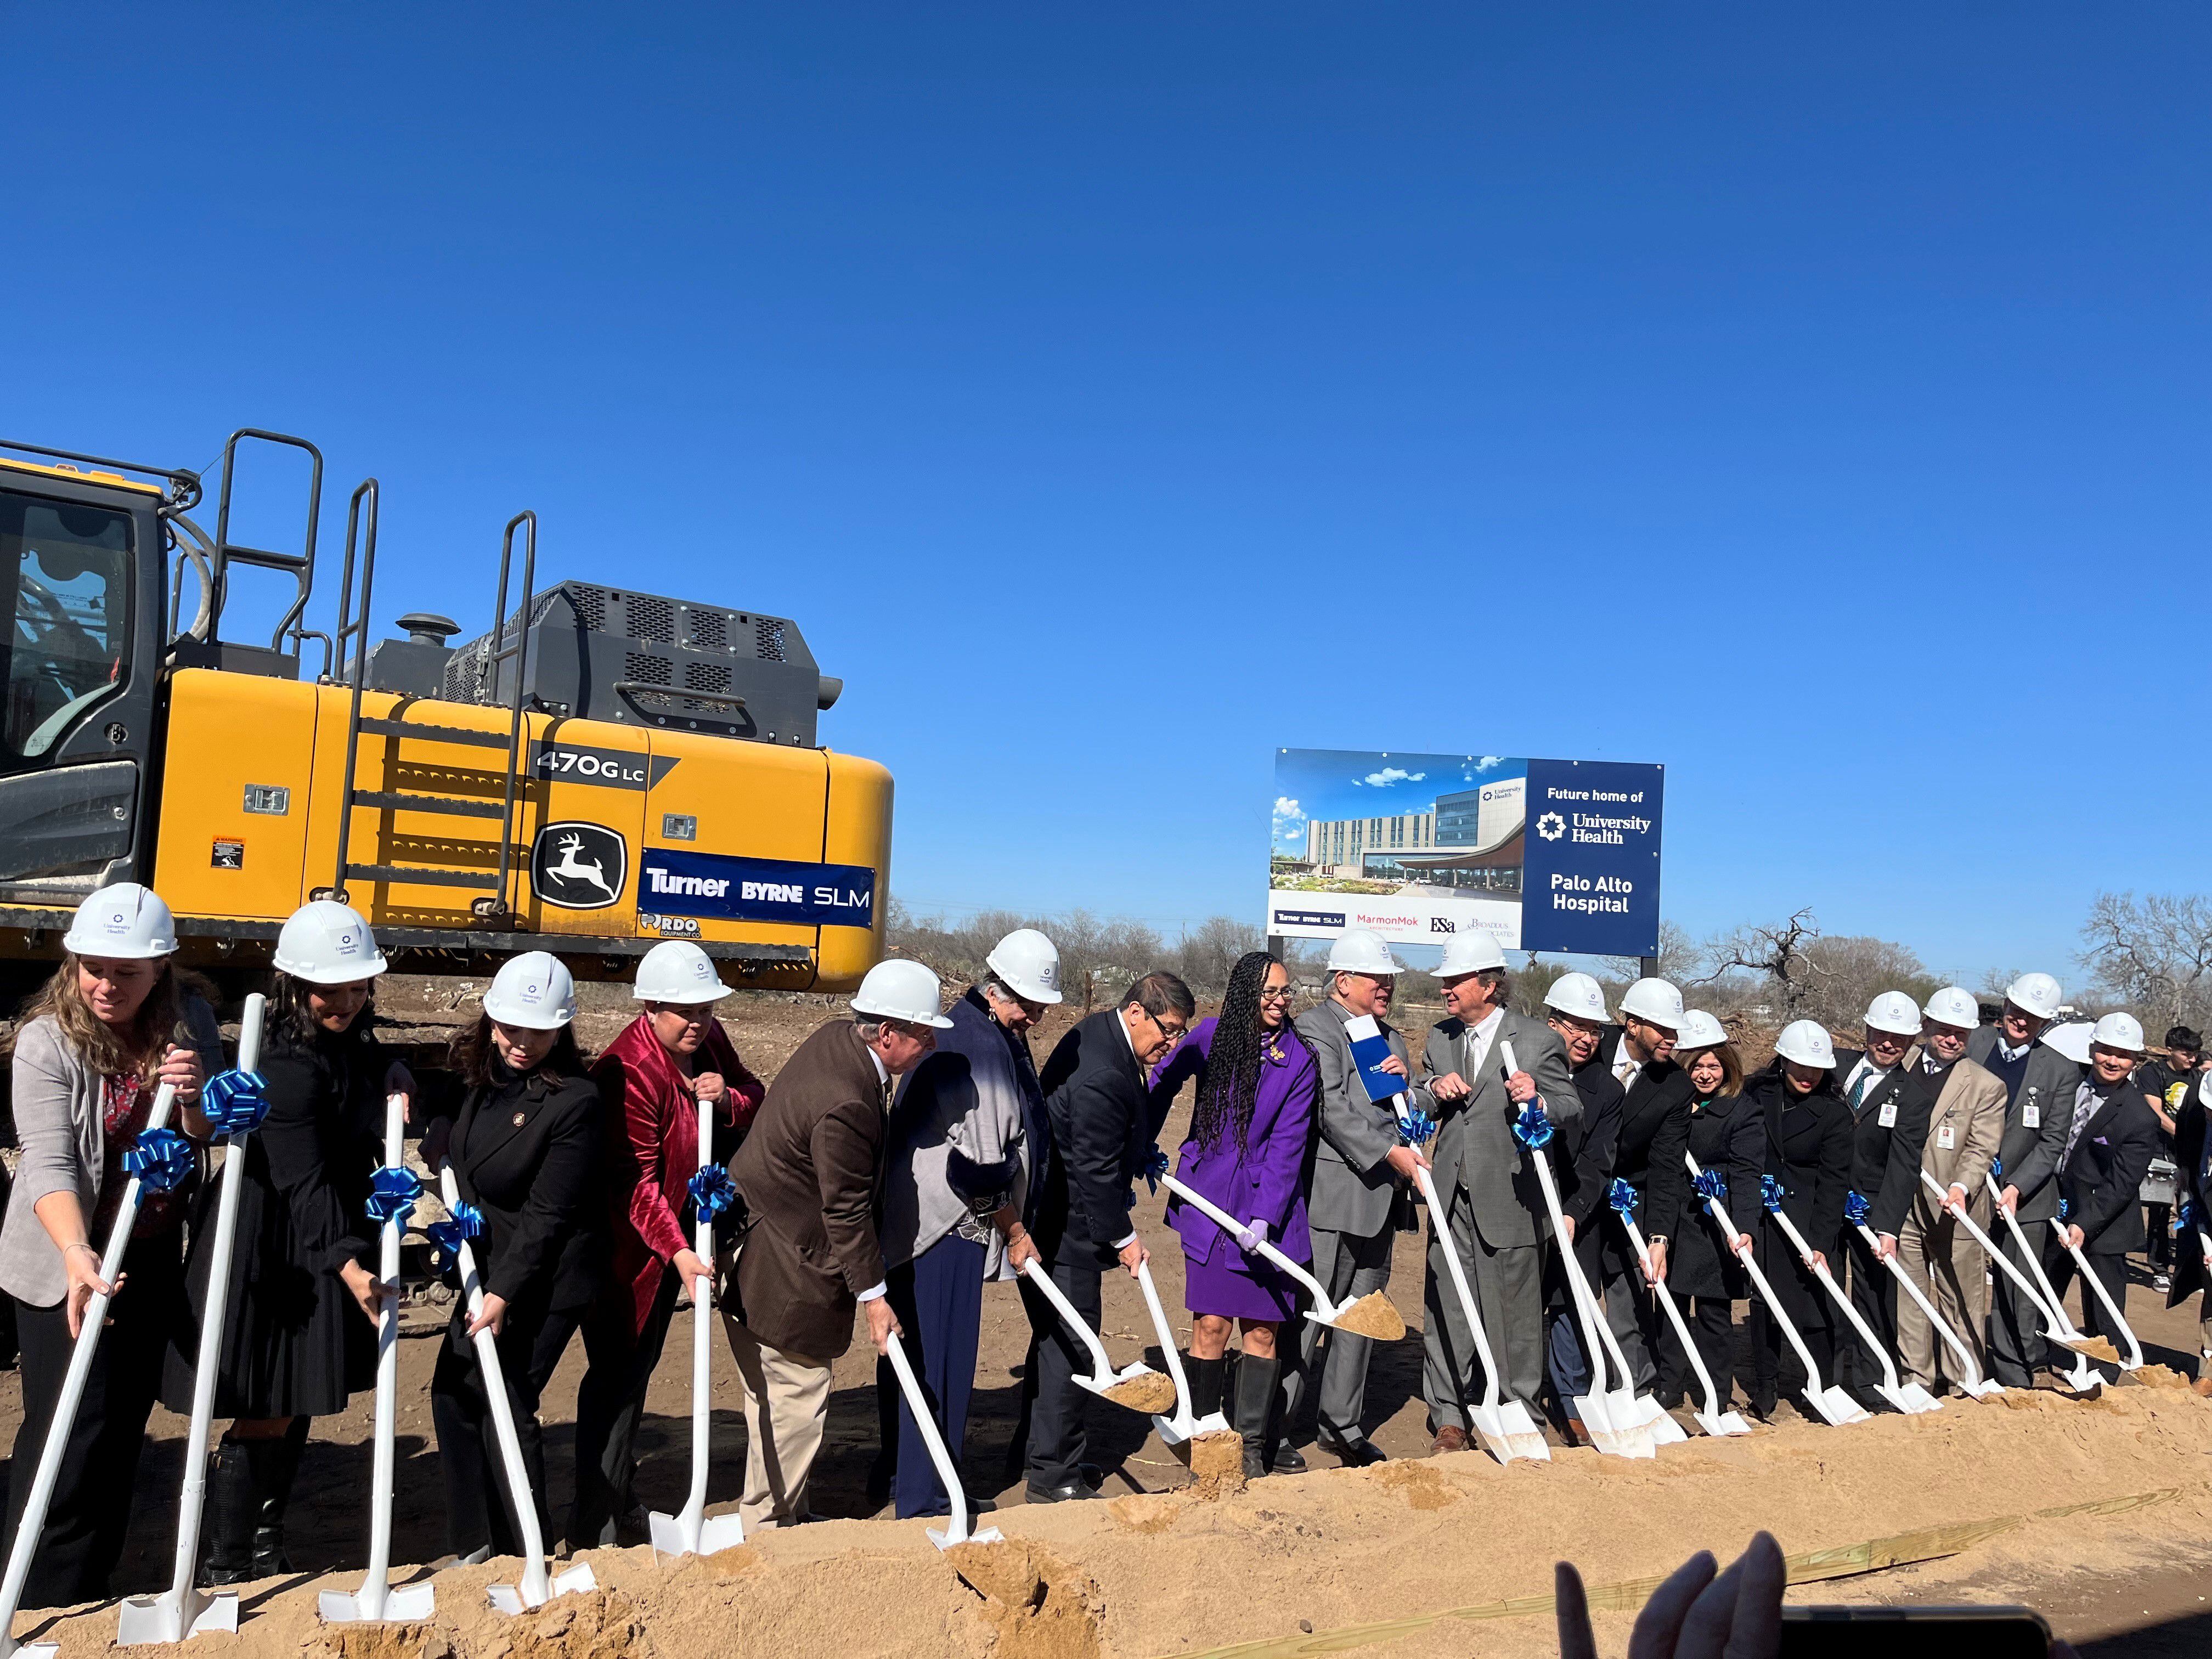 Bexar County and University Health officials broke ground Thursday on a 68-acre hospital on the city's South Side.